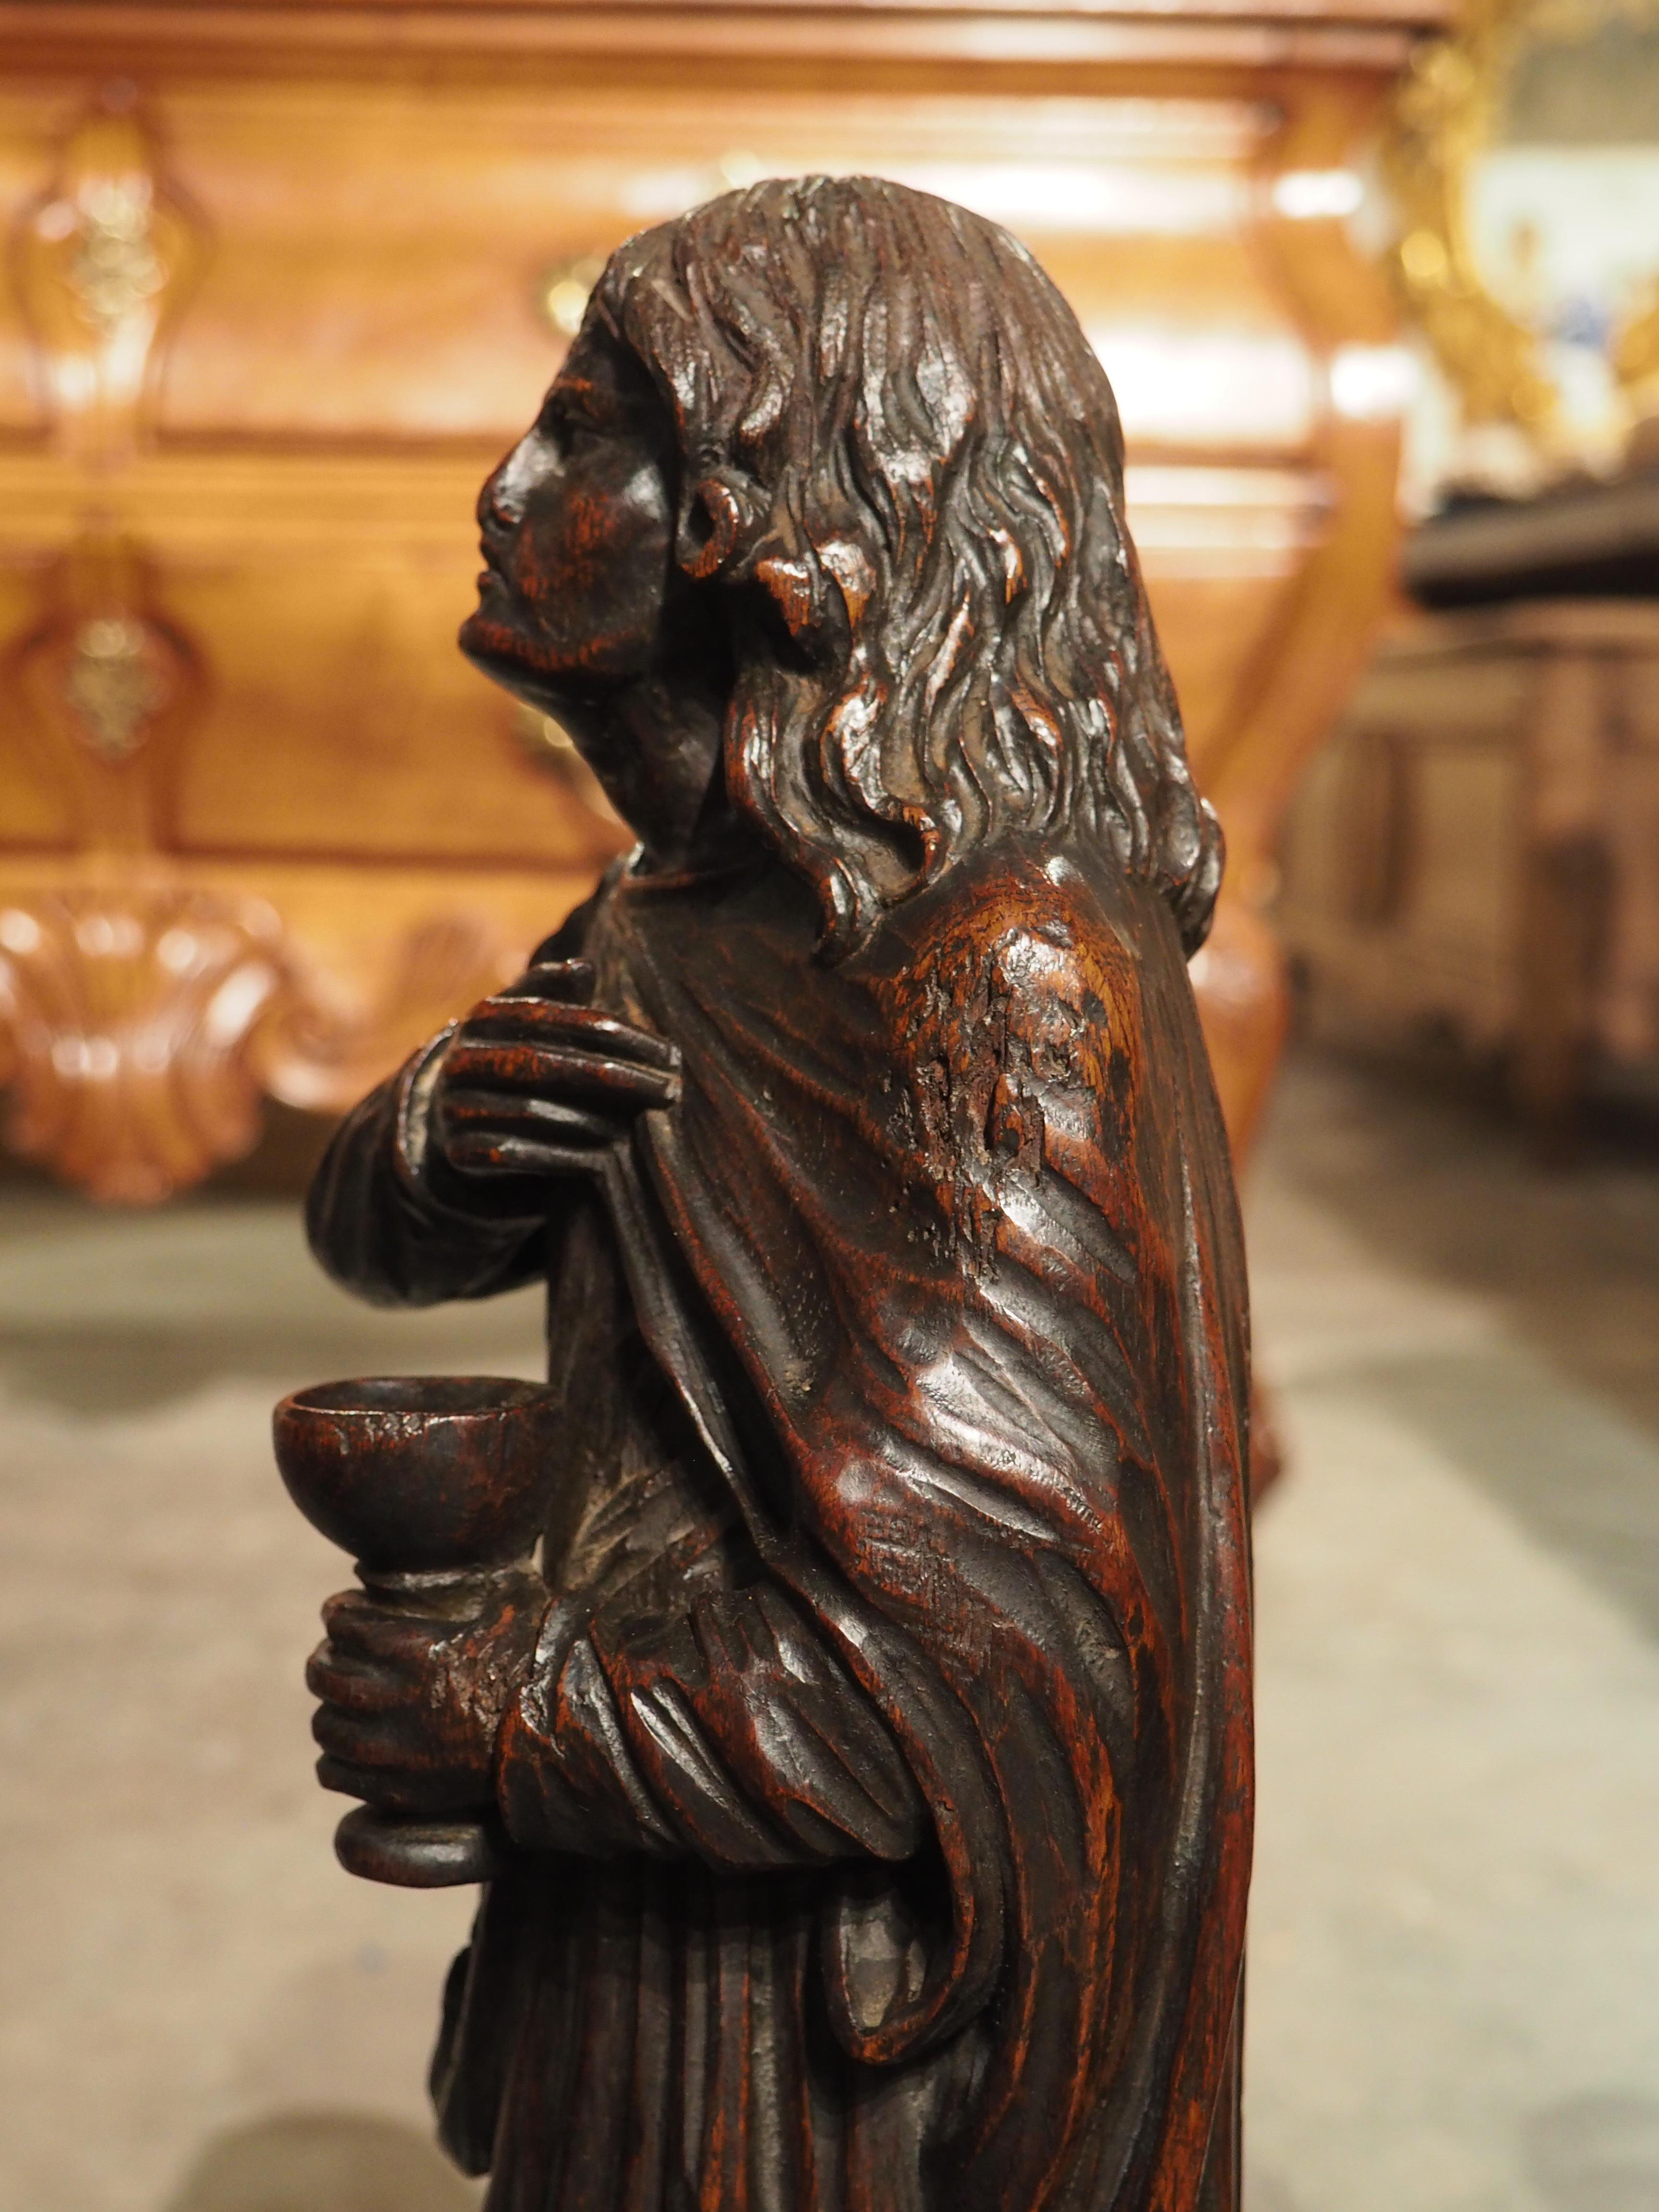 Circa 1800 Carved Oak Sculptures of the Apostles, James, John, Peter, and Paul For Sale 9